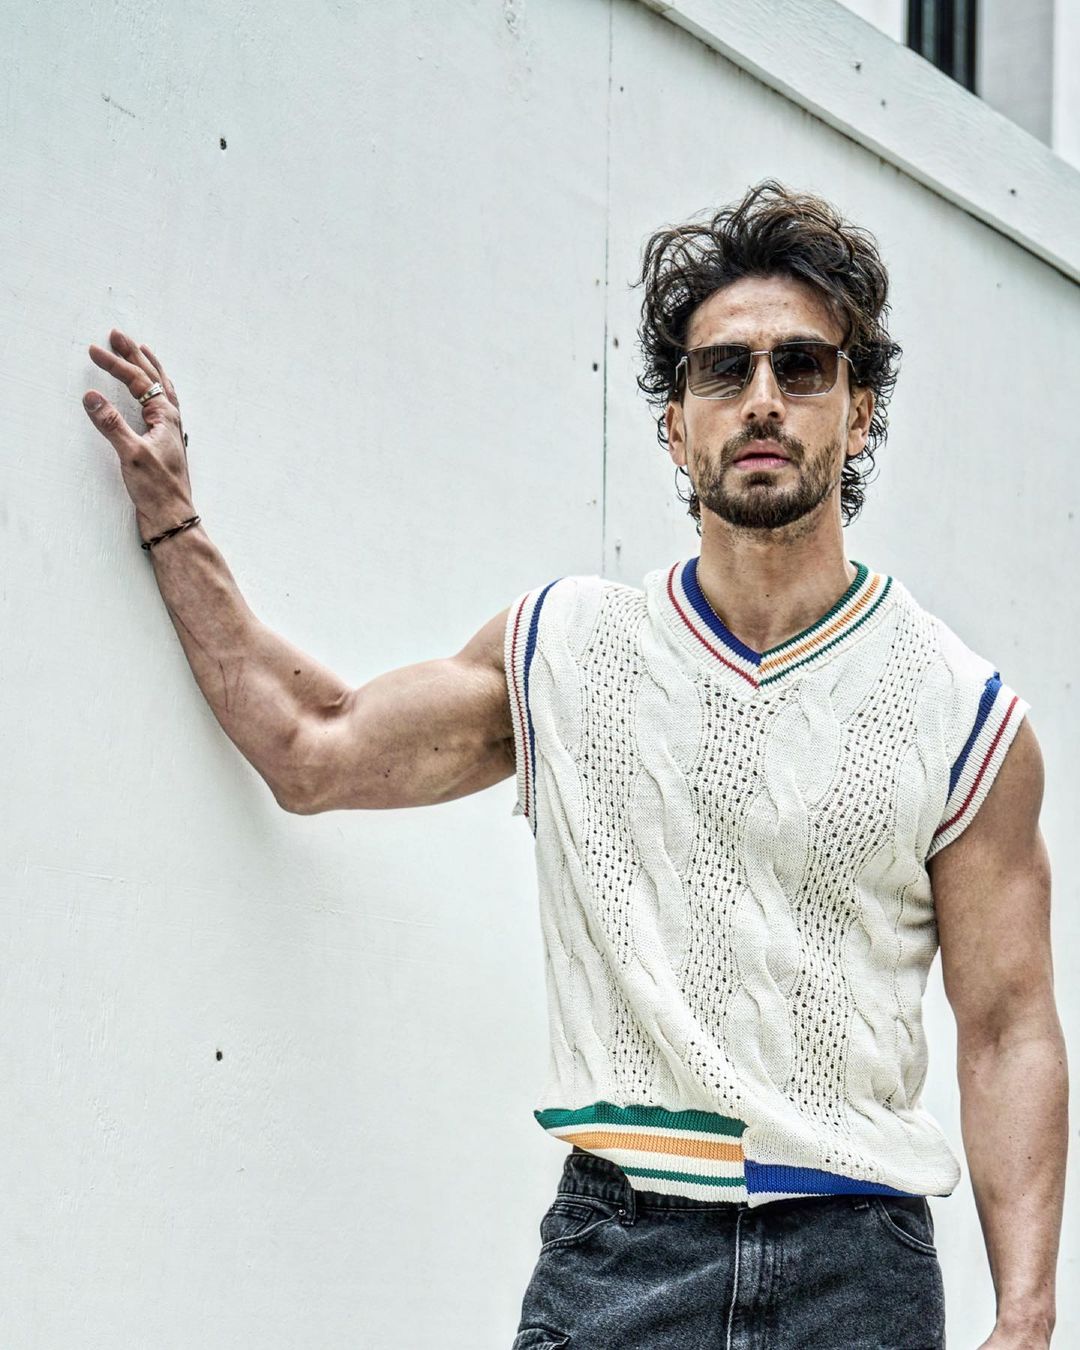 Tiger Shroff Beard and Hairstyle